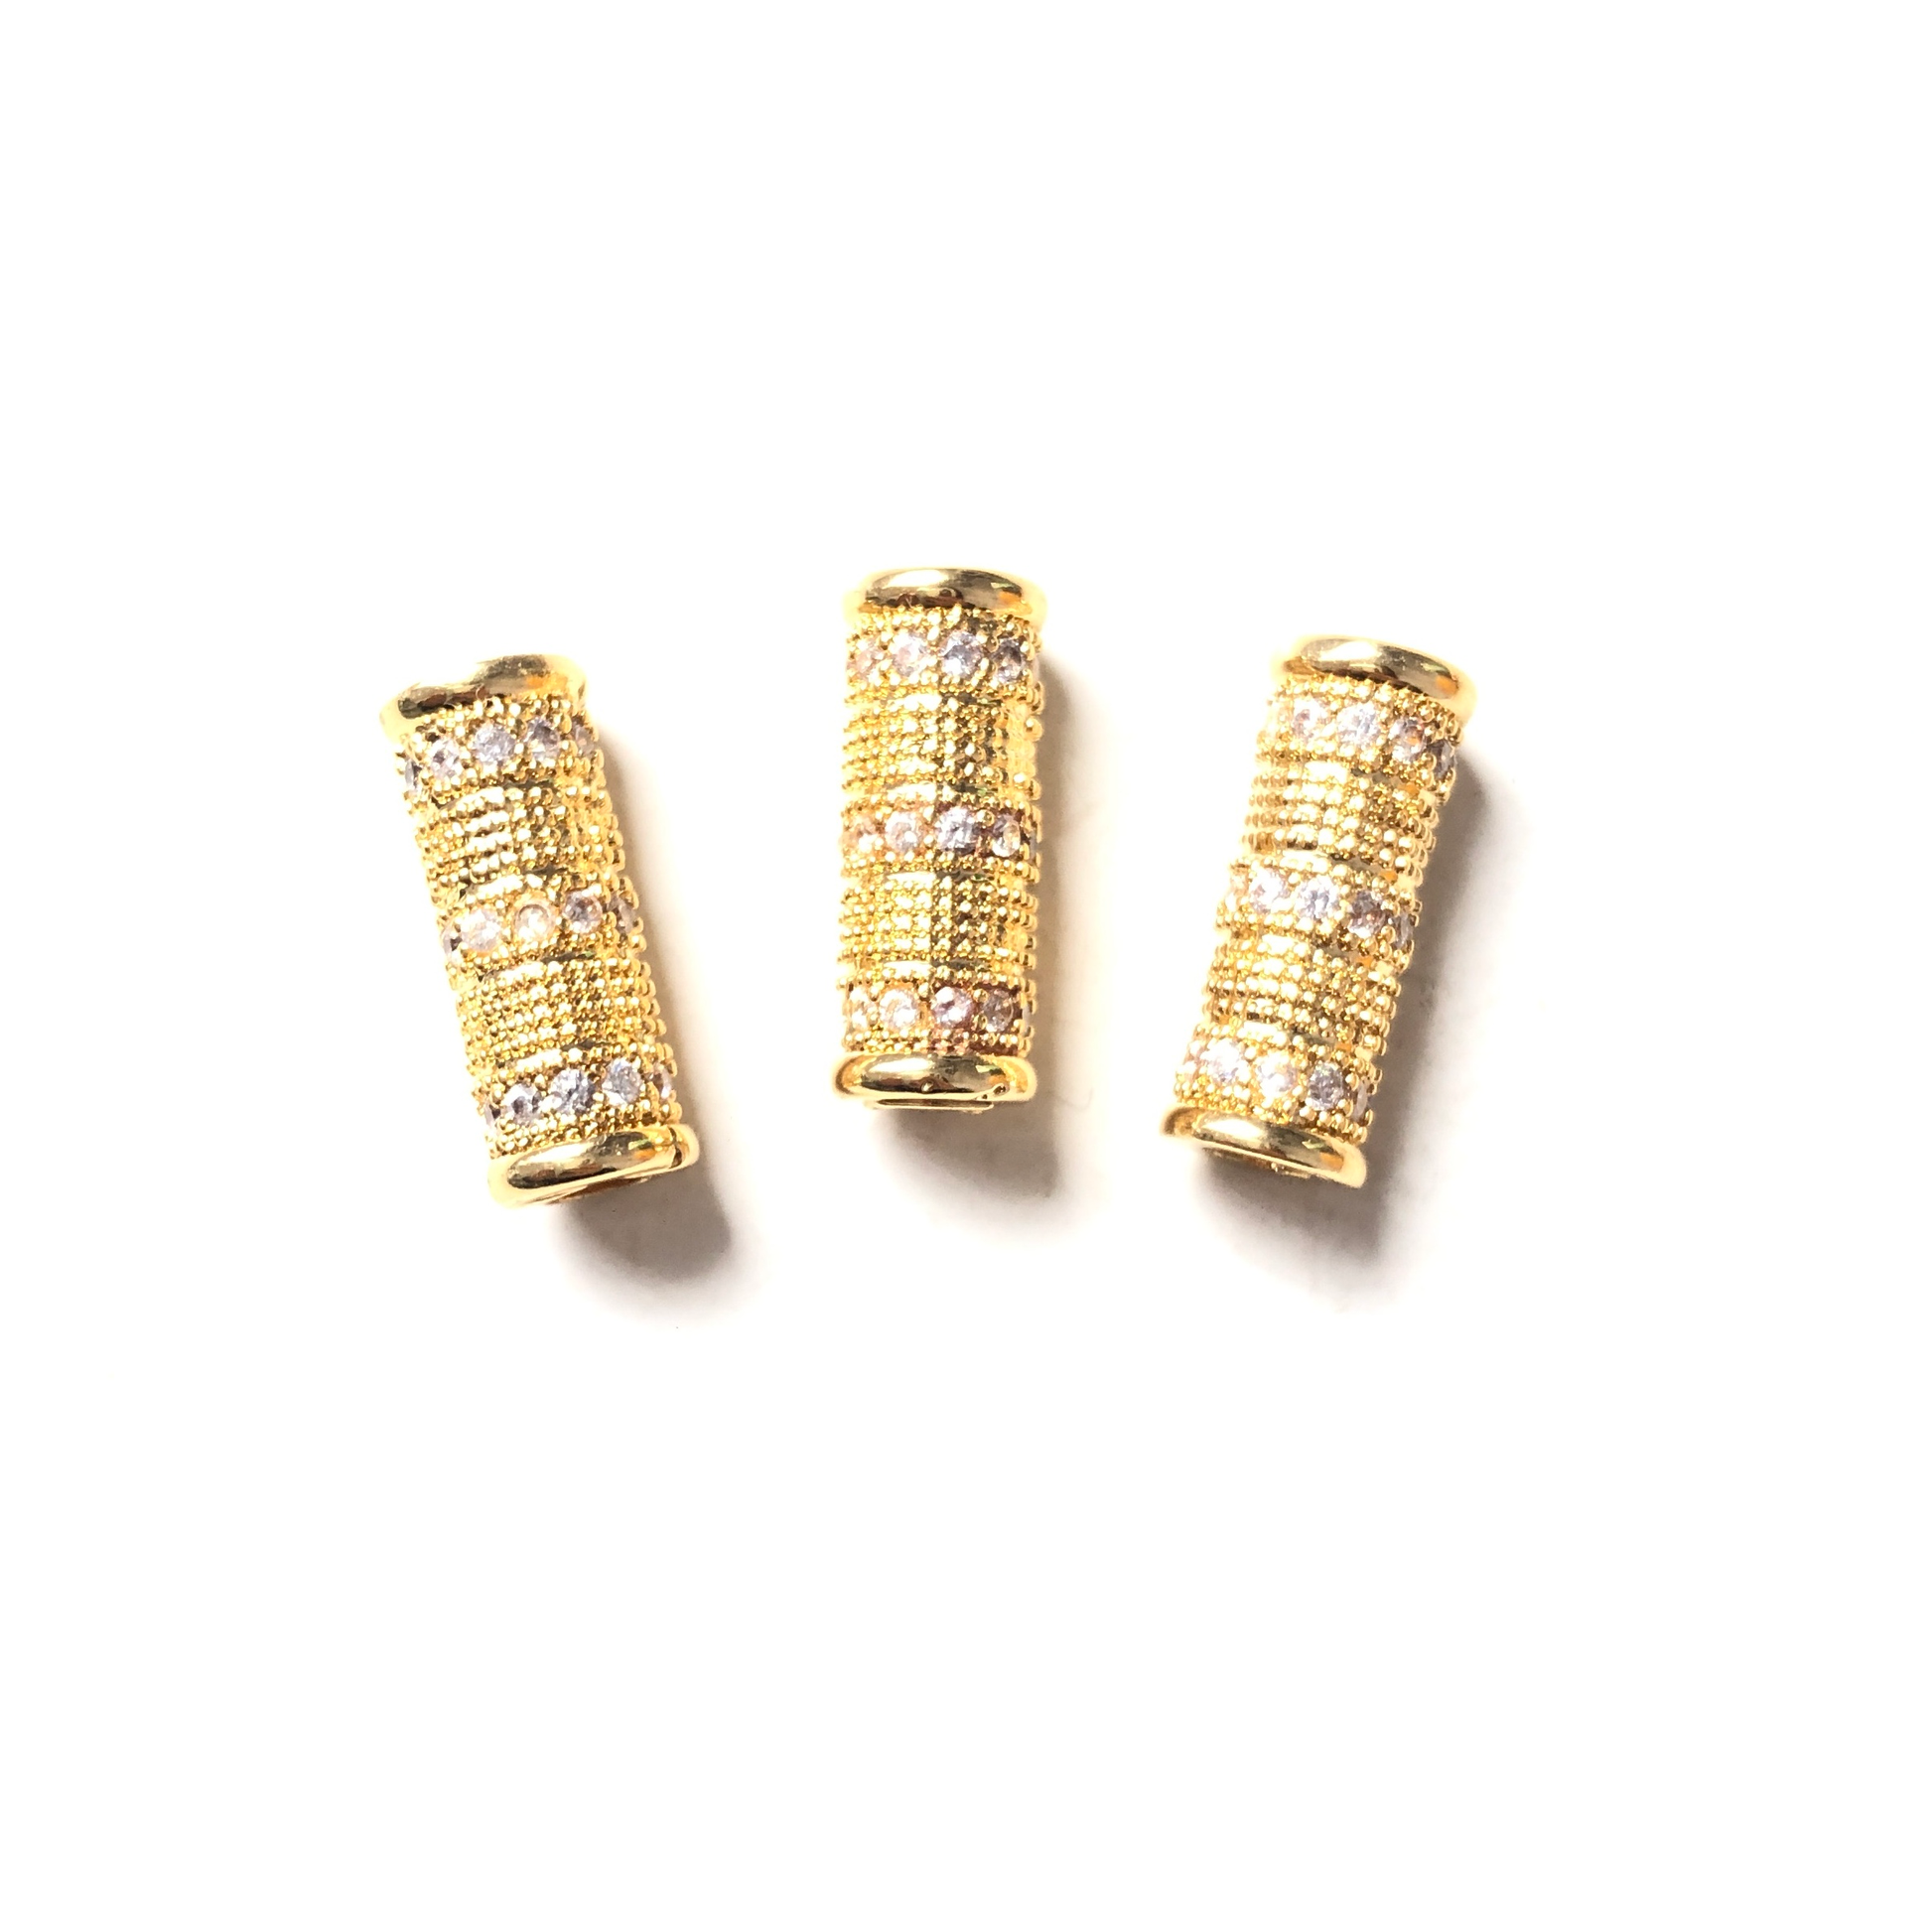 10pcs/lot 16*6mm CZ Paved Straight Tube Spacers Gold CZ Paved Spacers Tube Bar Centerpieces Charms Beads Beyond